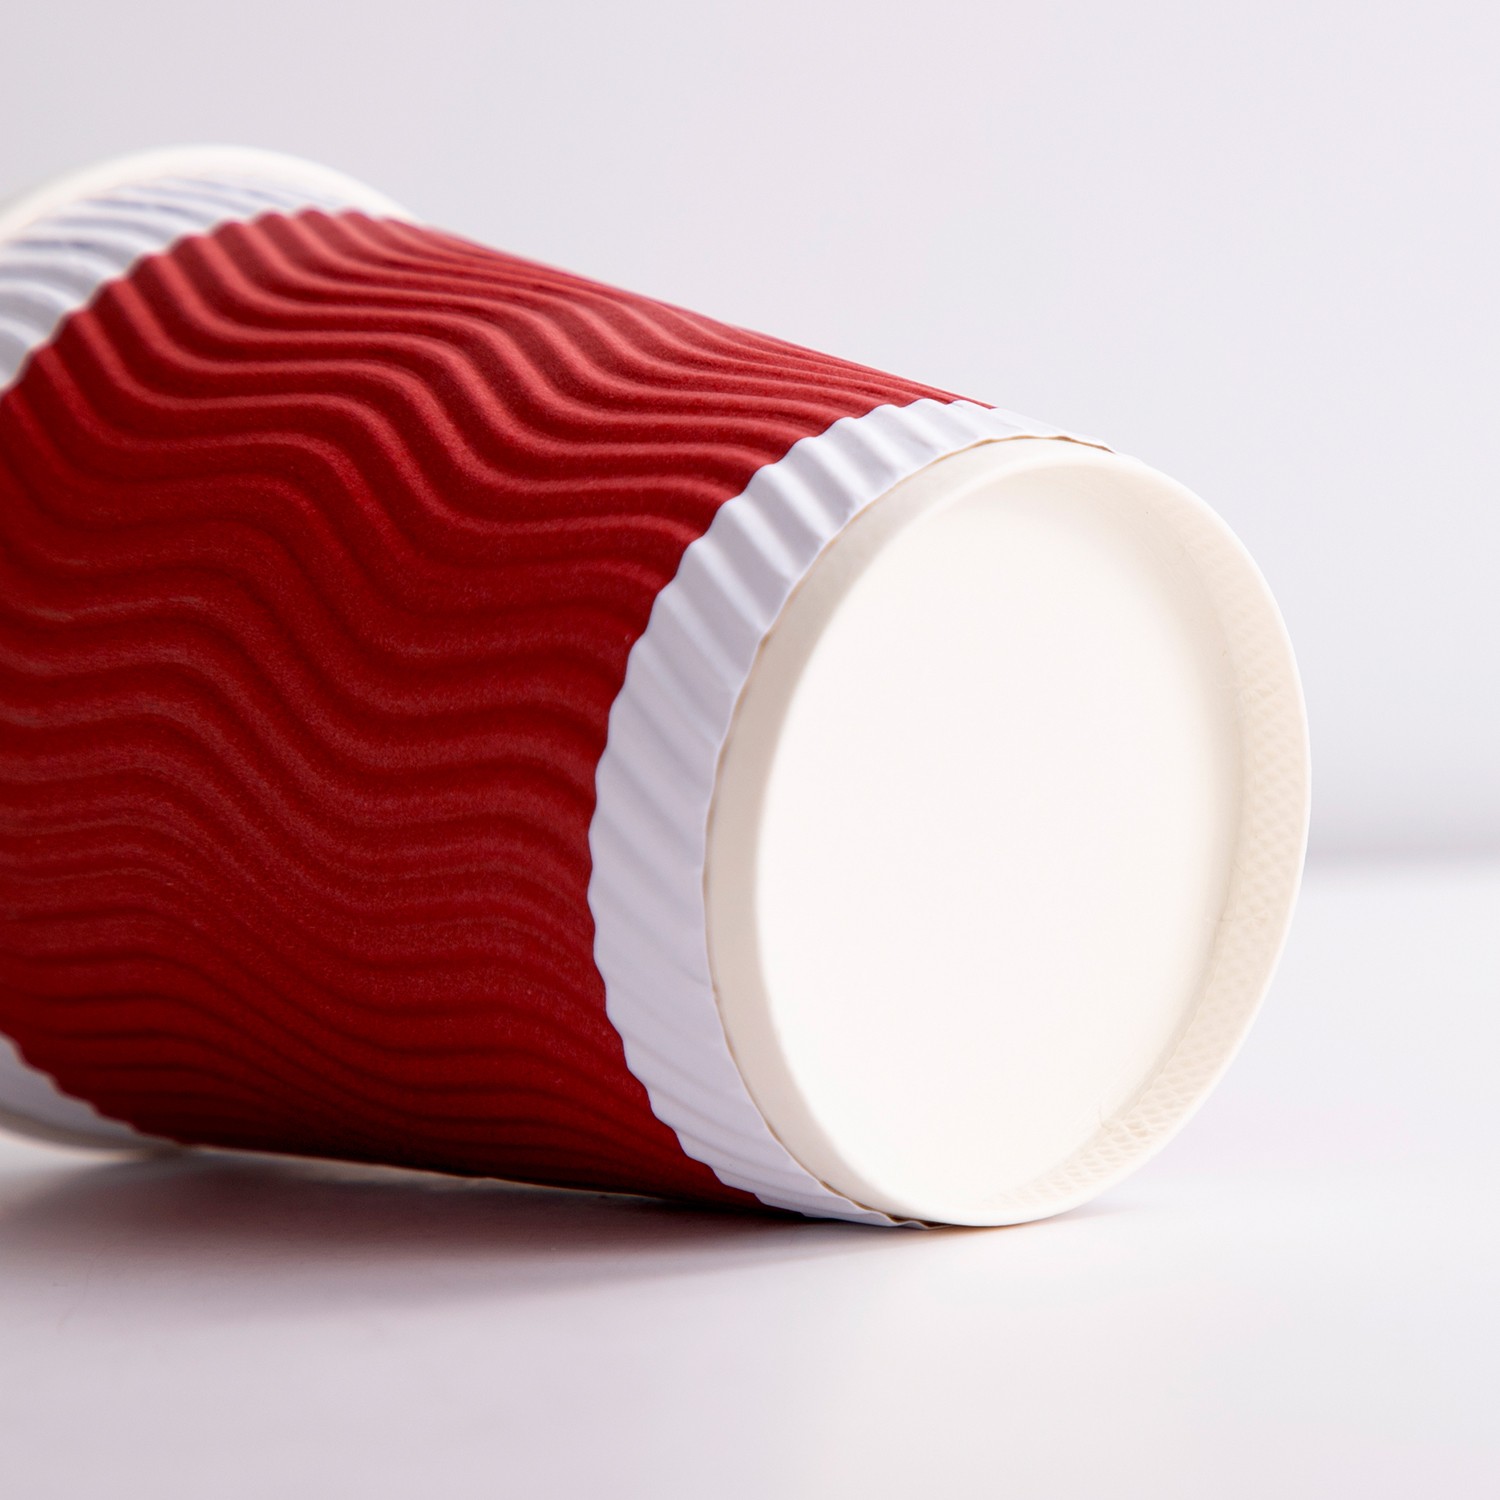 Double layered paper cup